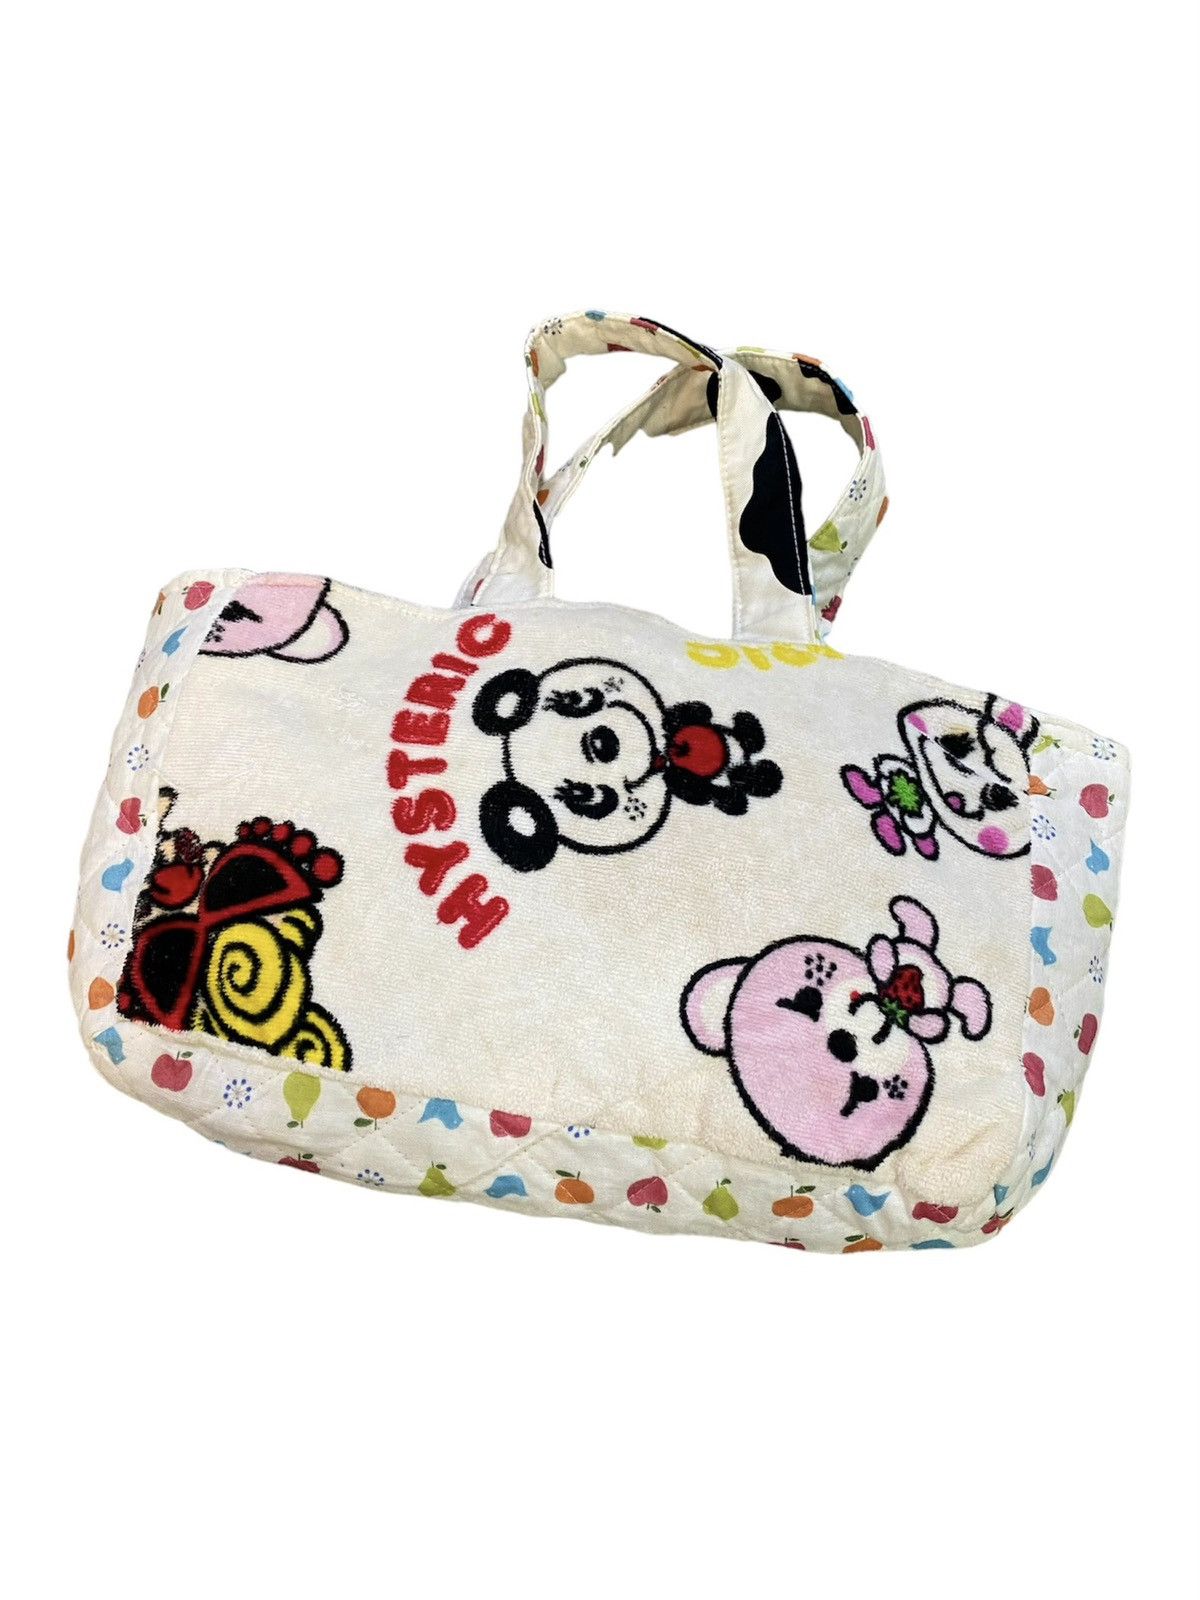 Hysteric Glamour 2 in 1 Towel Tote Bag - 1